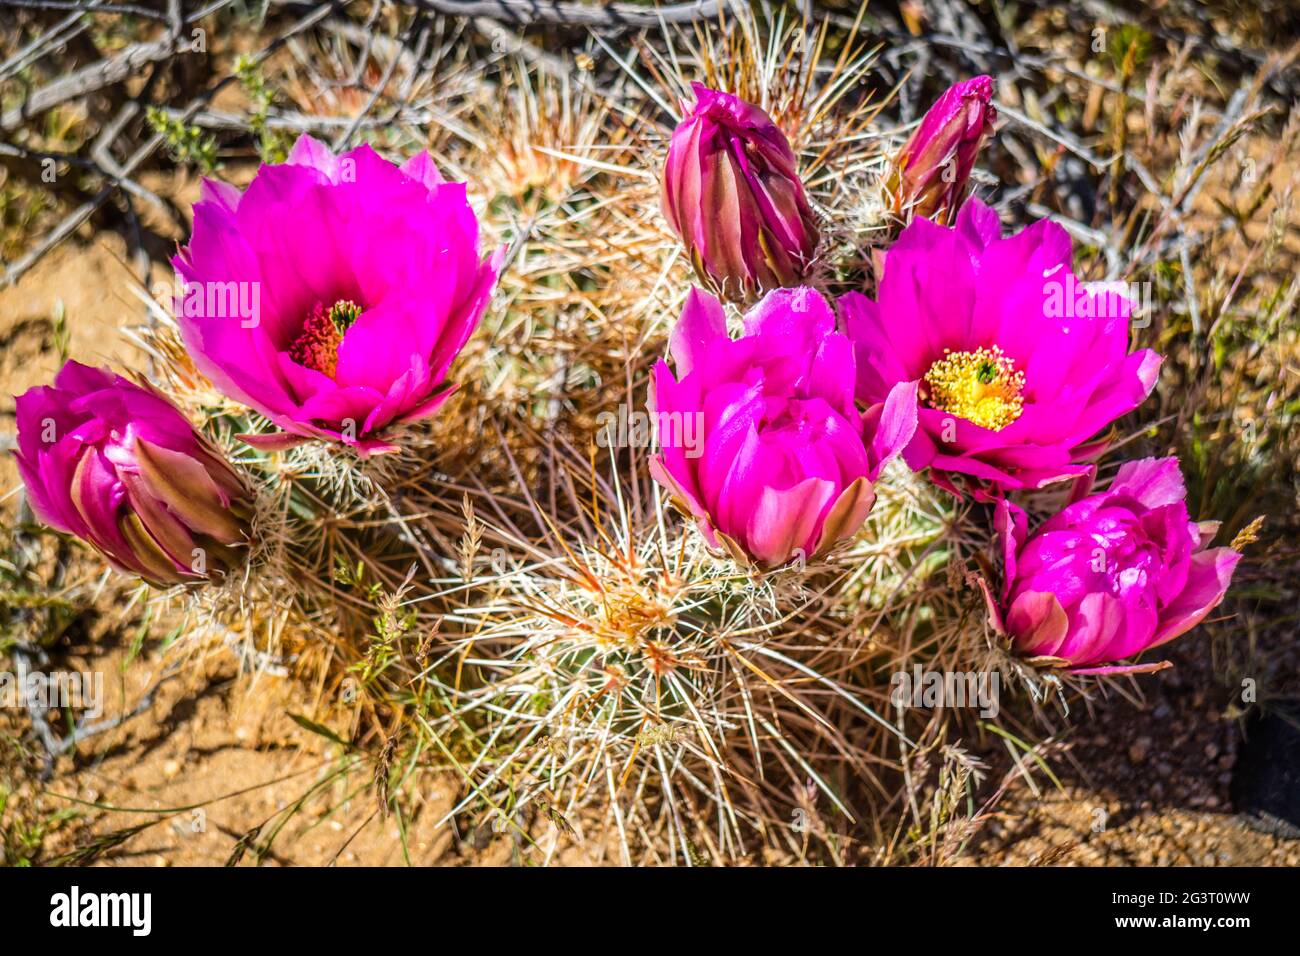 A pink flowering cactus plants in Joshua National Park, California Stock Photo